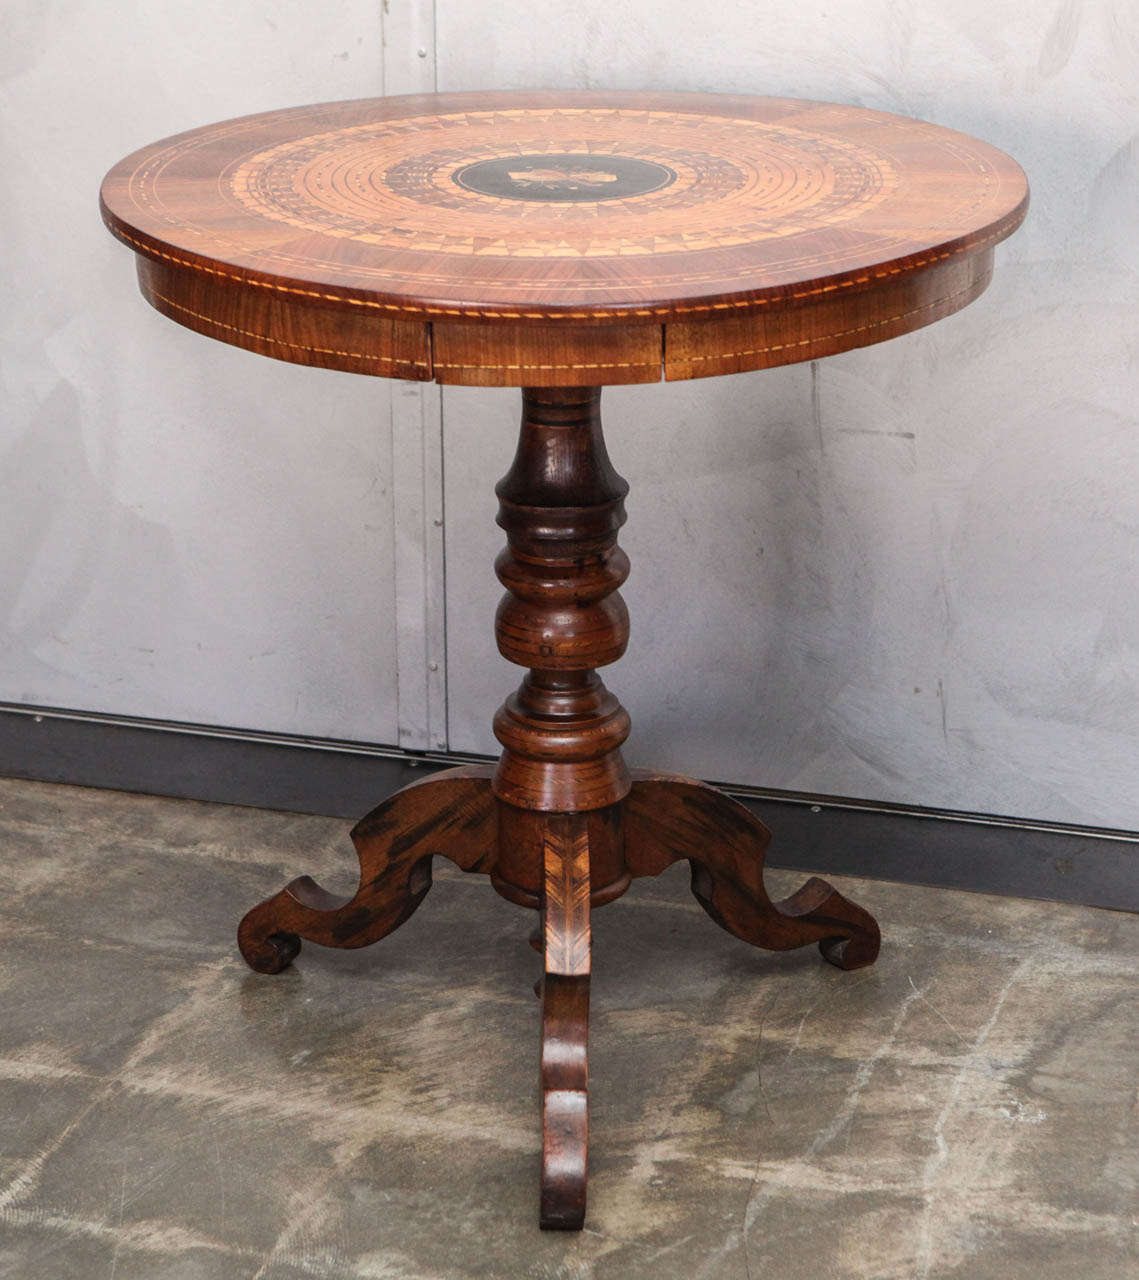 This table an exquisite example of parquetry and marquetry artistry. The combination of figurative and geometric woodworking techniques add to the preciousness of this handcrafted late 1800's piece. There is a little drawer that measures 6.25"